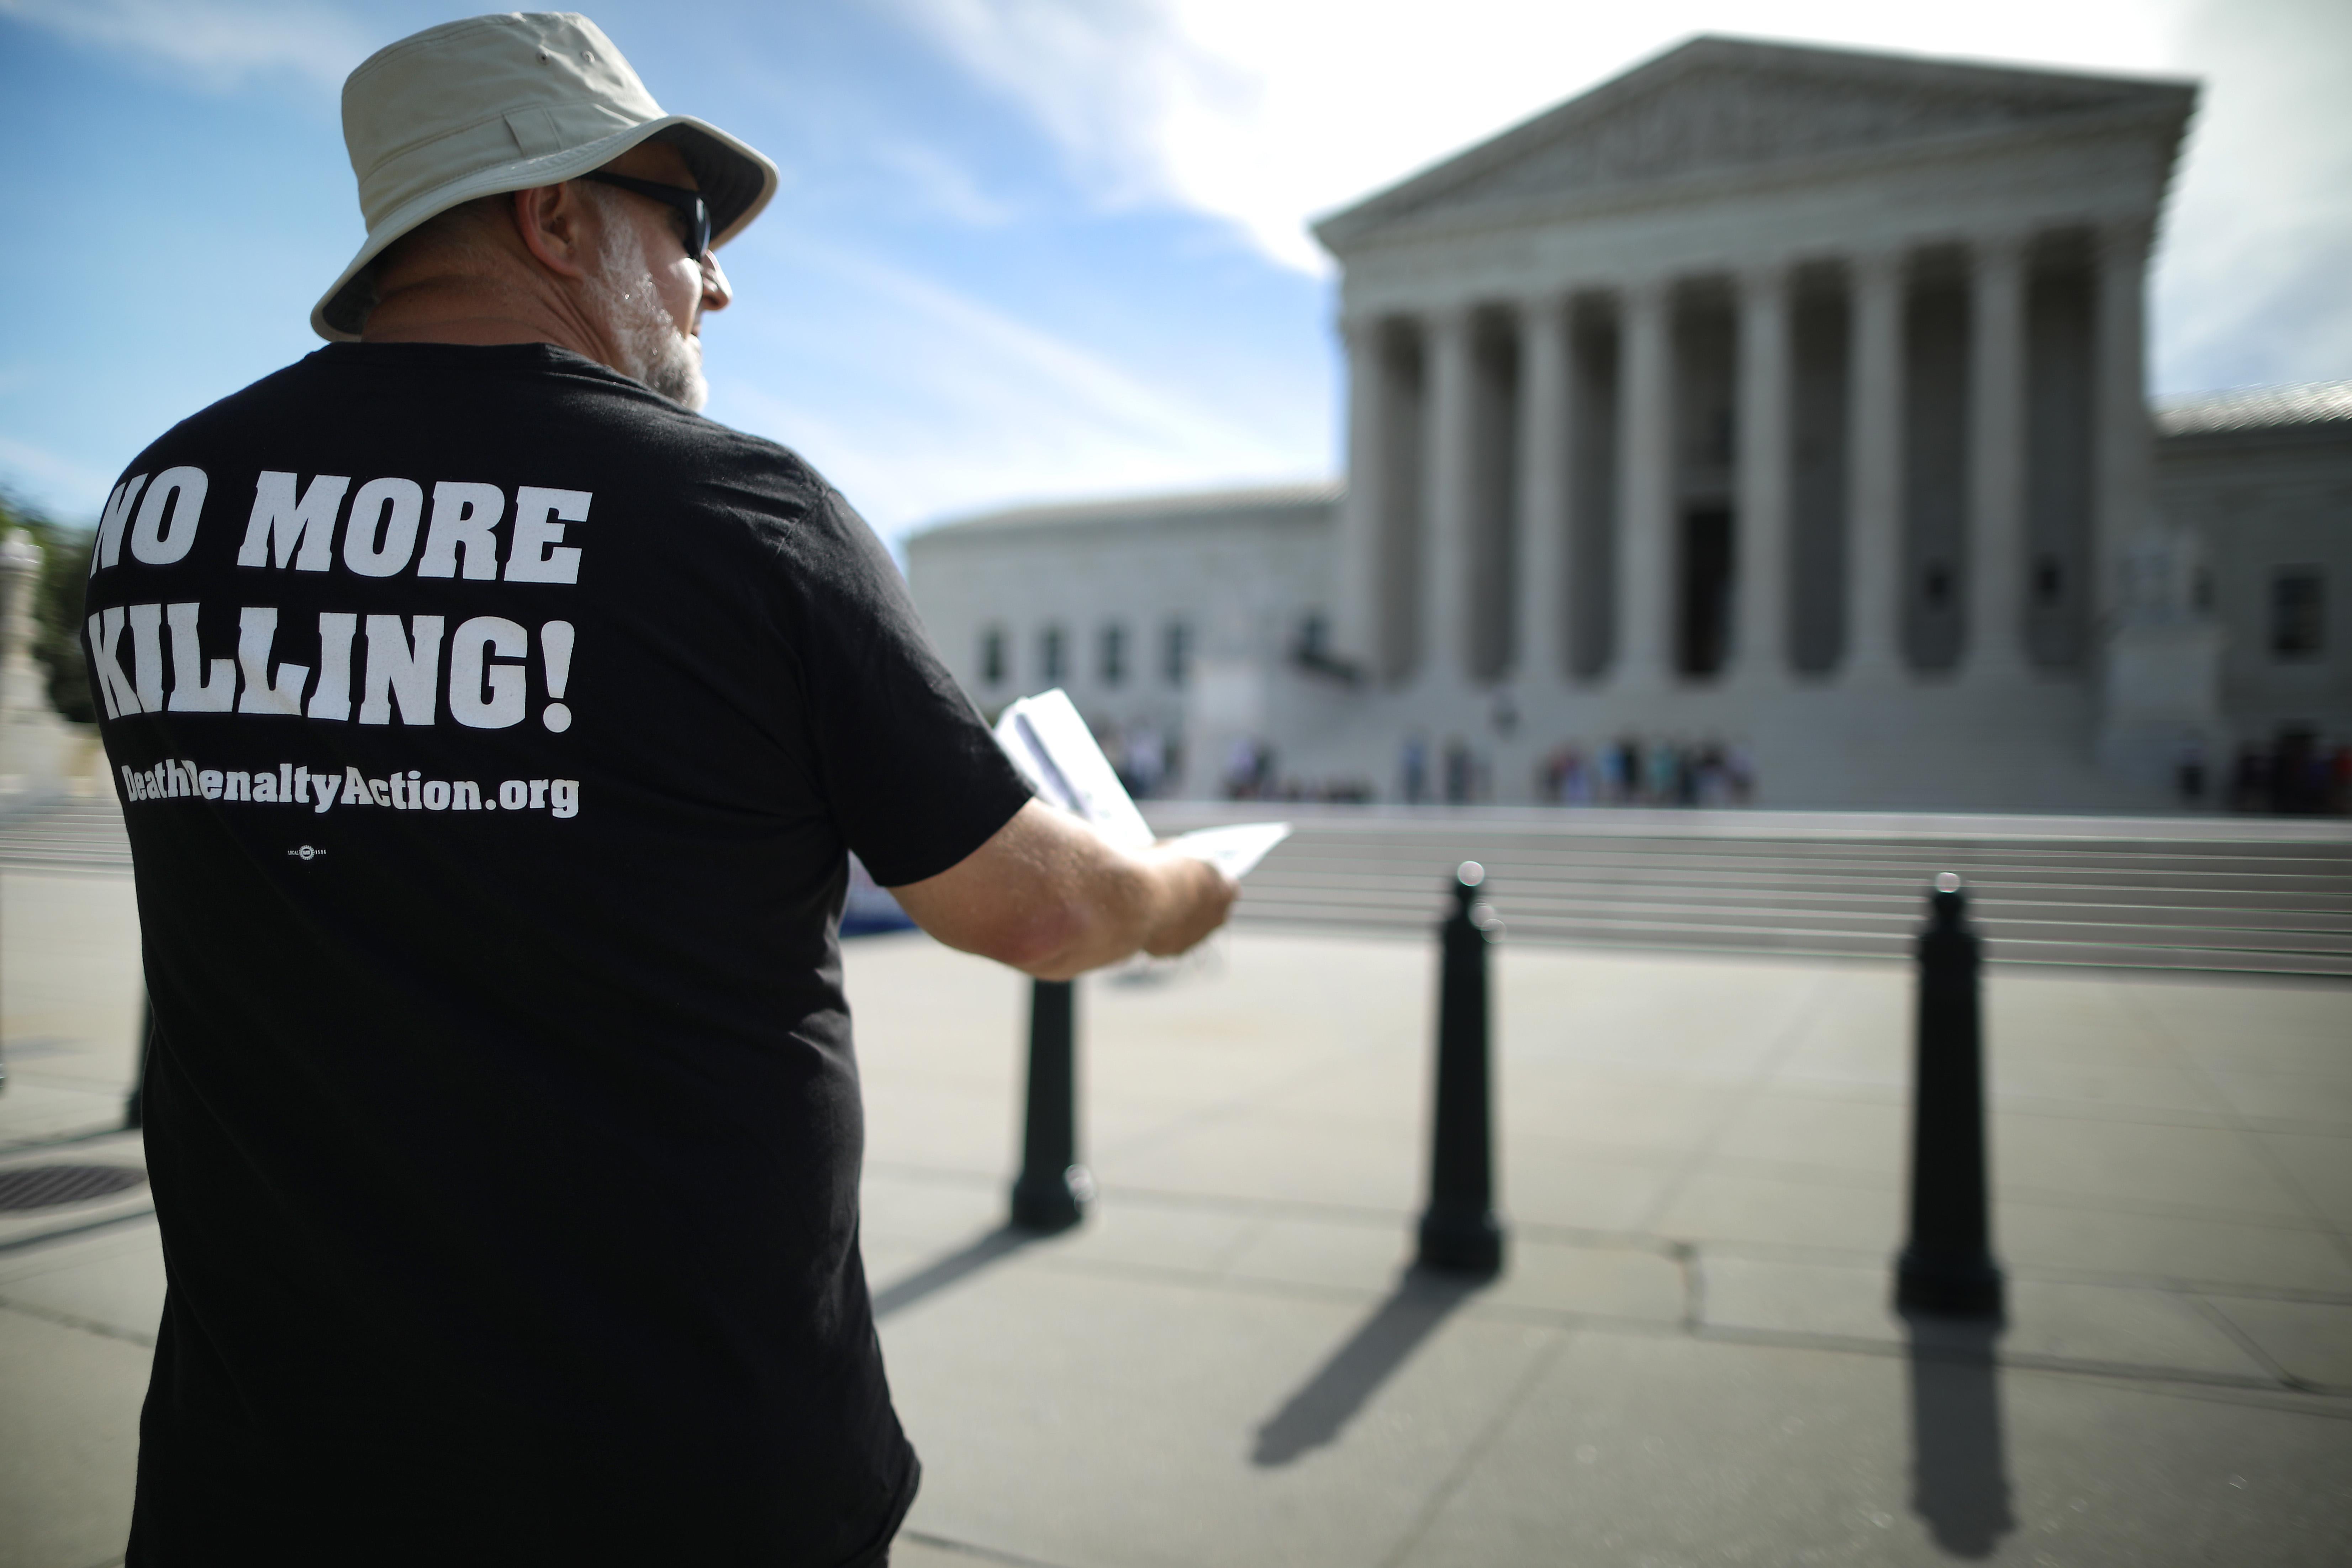 A death penalty abolitionist wearing a T-shirt that says "NO MORE KILLING" protests in front of the Supreme Court